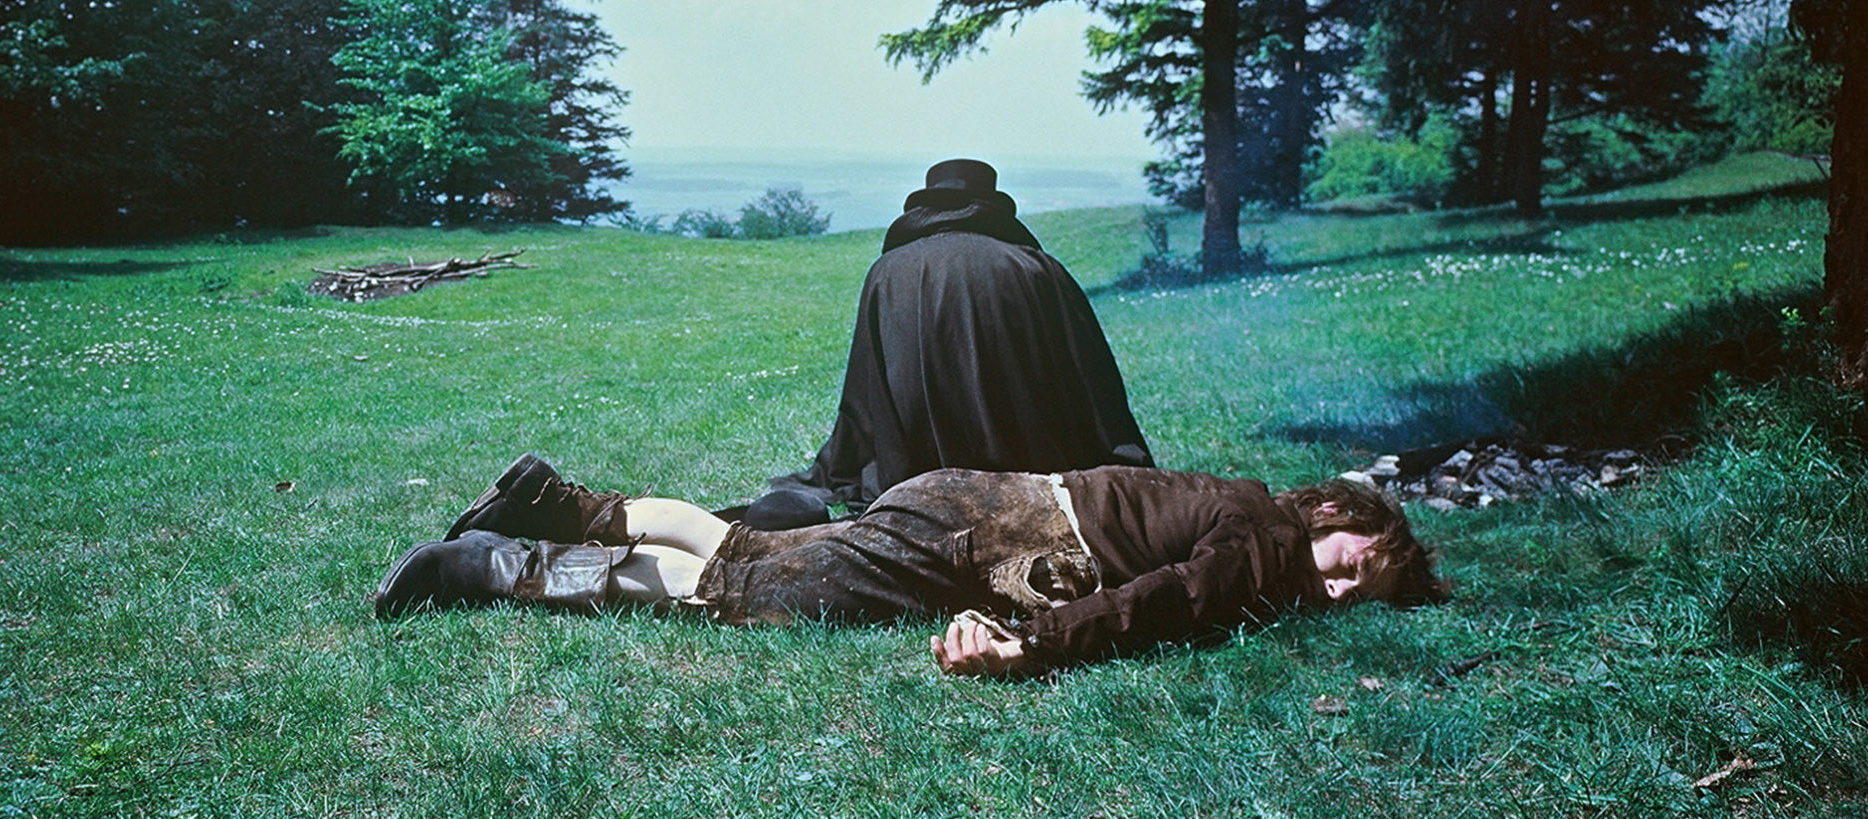 Kaspar Hauser Travels the Countryside for the First Time